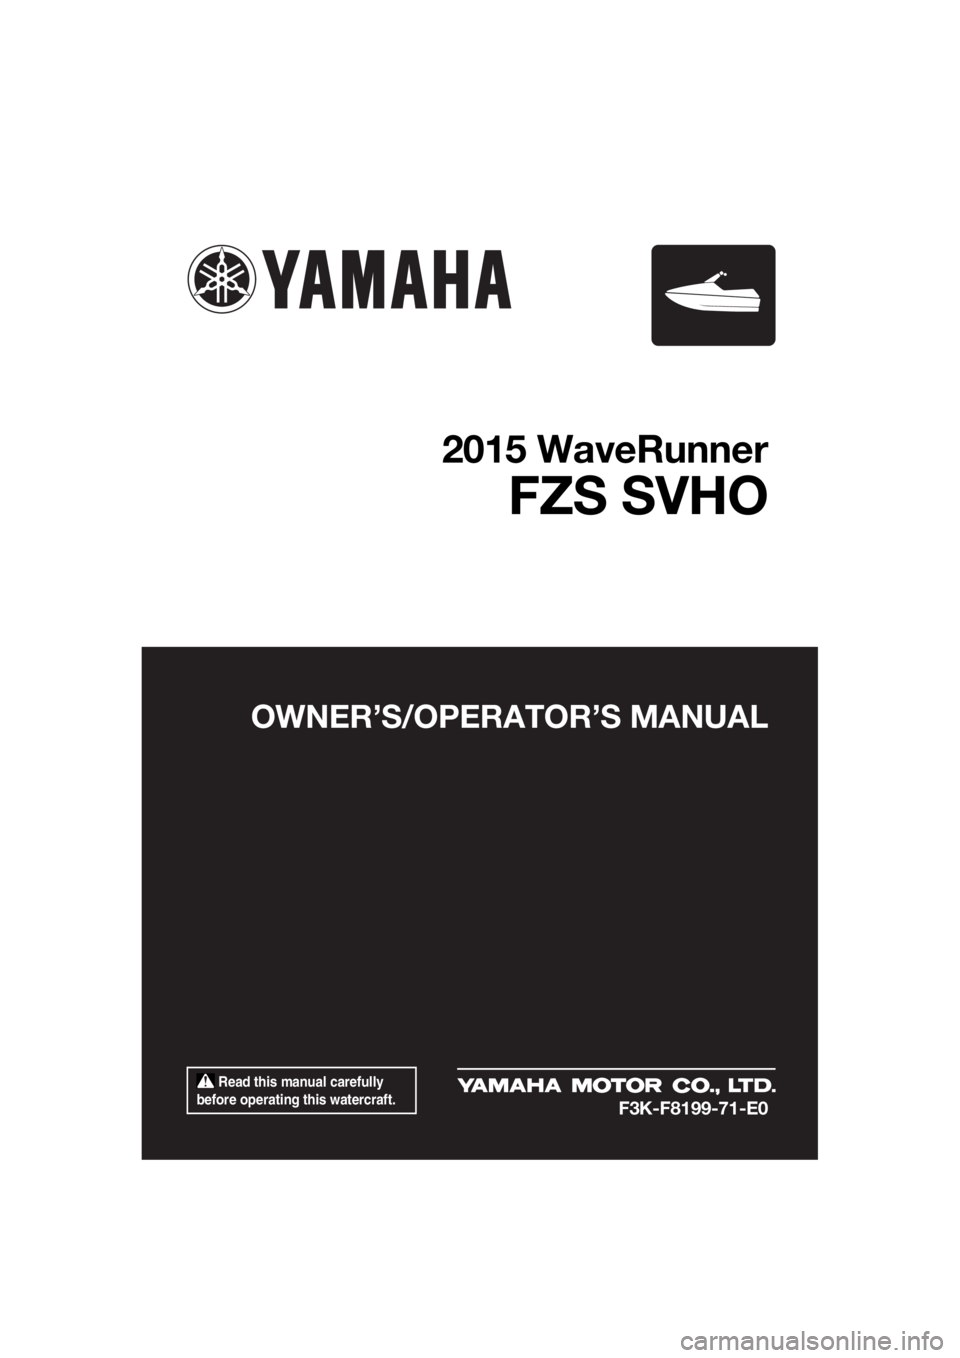 YAMAHA FZS 2015  Owners Manual  Read this manual carefully 
before operating this watercraft.
OWNER’S/OPERATOR’S MANUAL
2015 WaveRunner
FZS SVHO
F3K-F8199-71-E0
UF3K71E0.book  Page 1  Monday, August 18, 2014  2:54 PM 